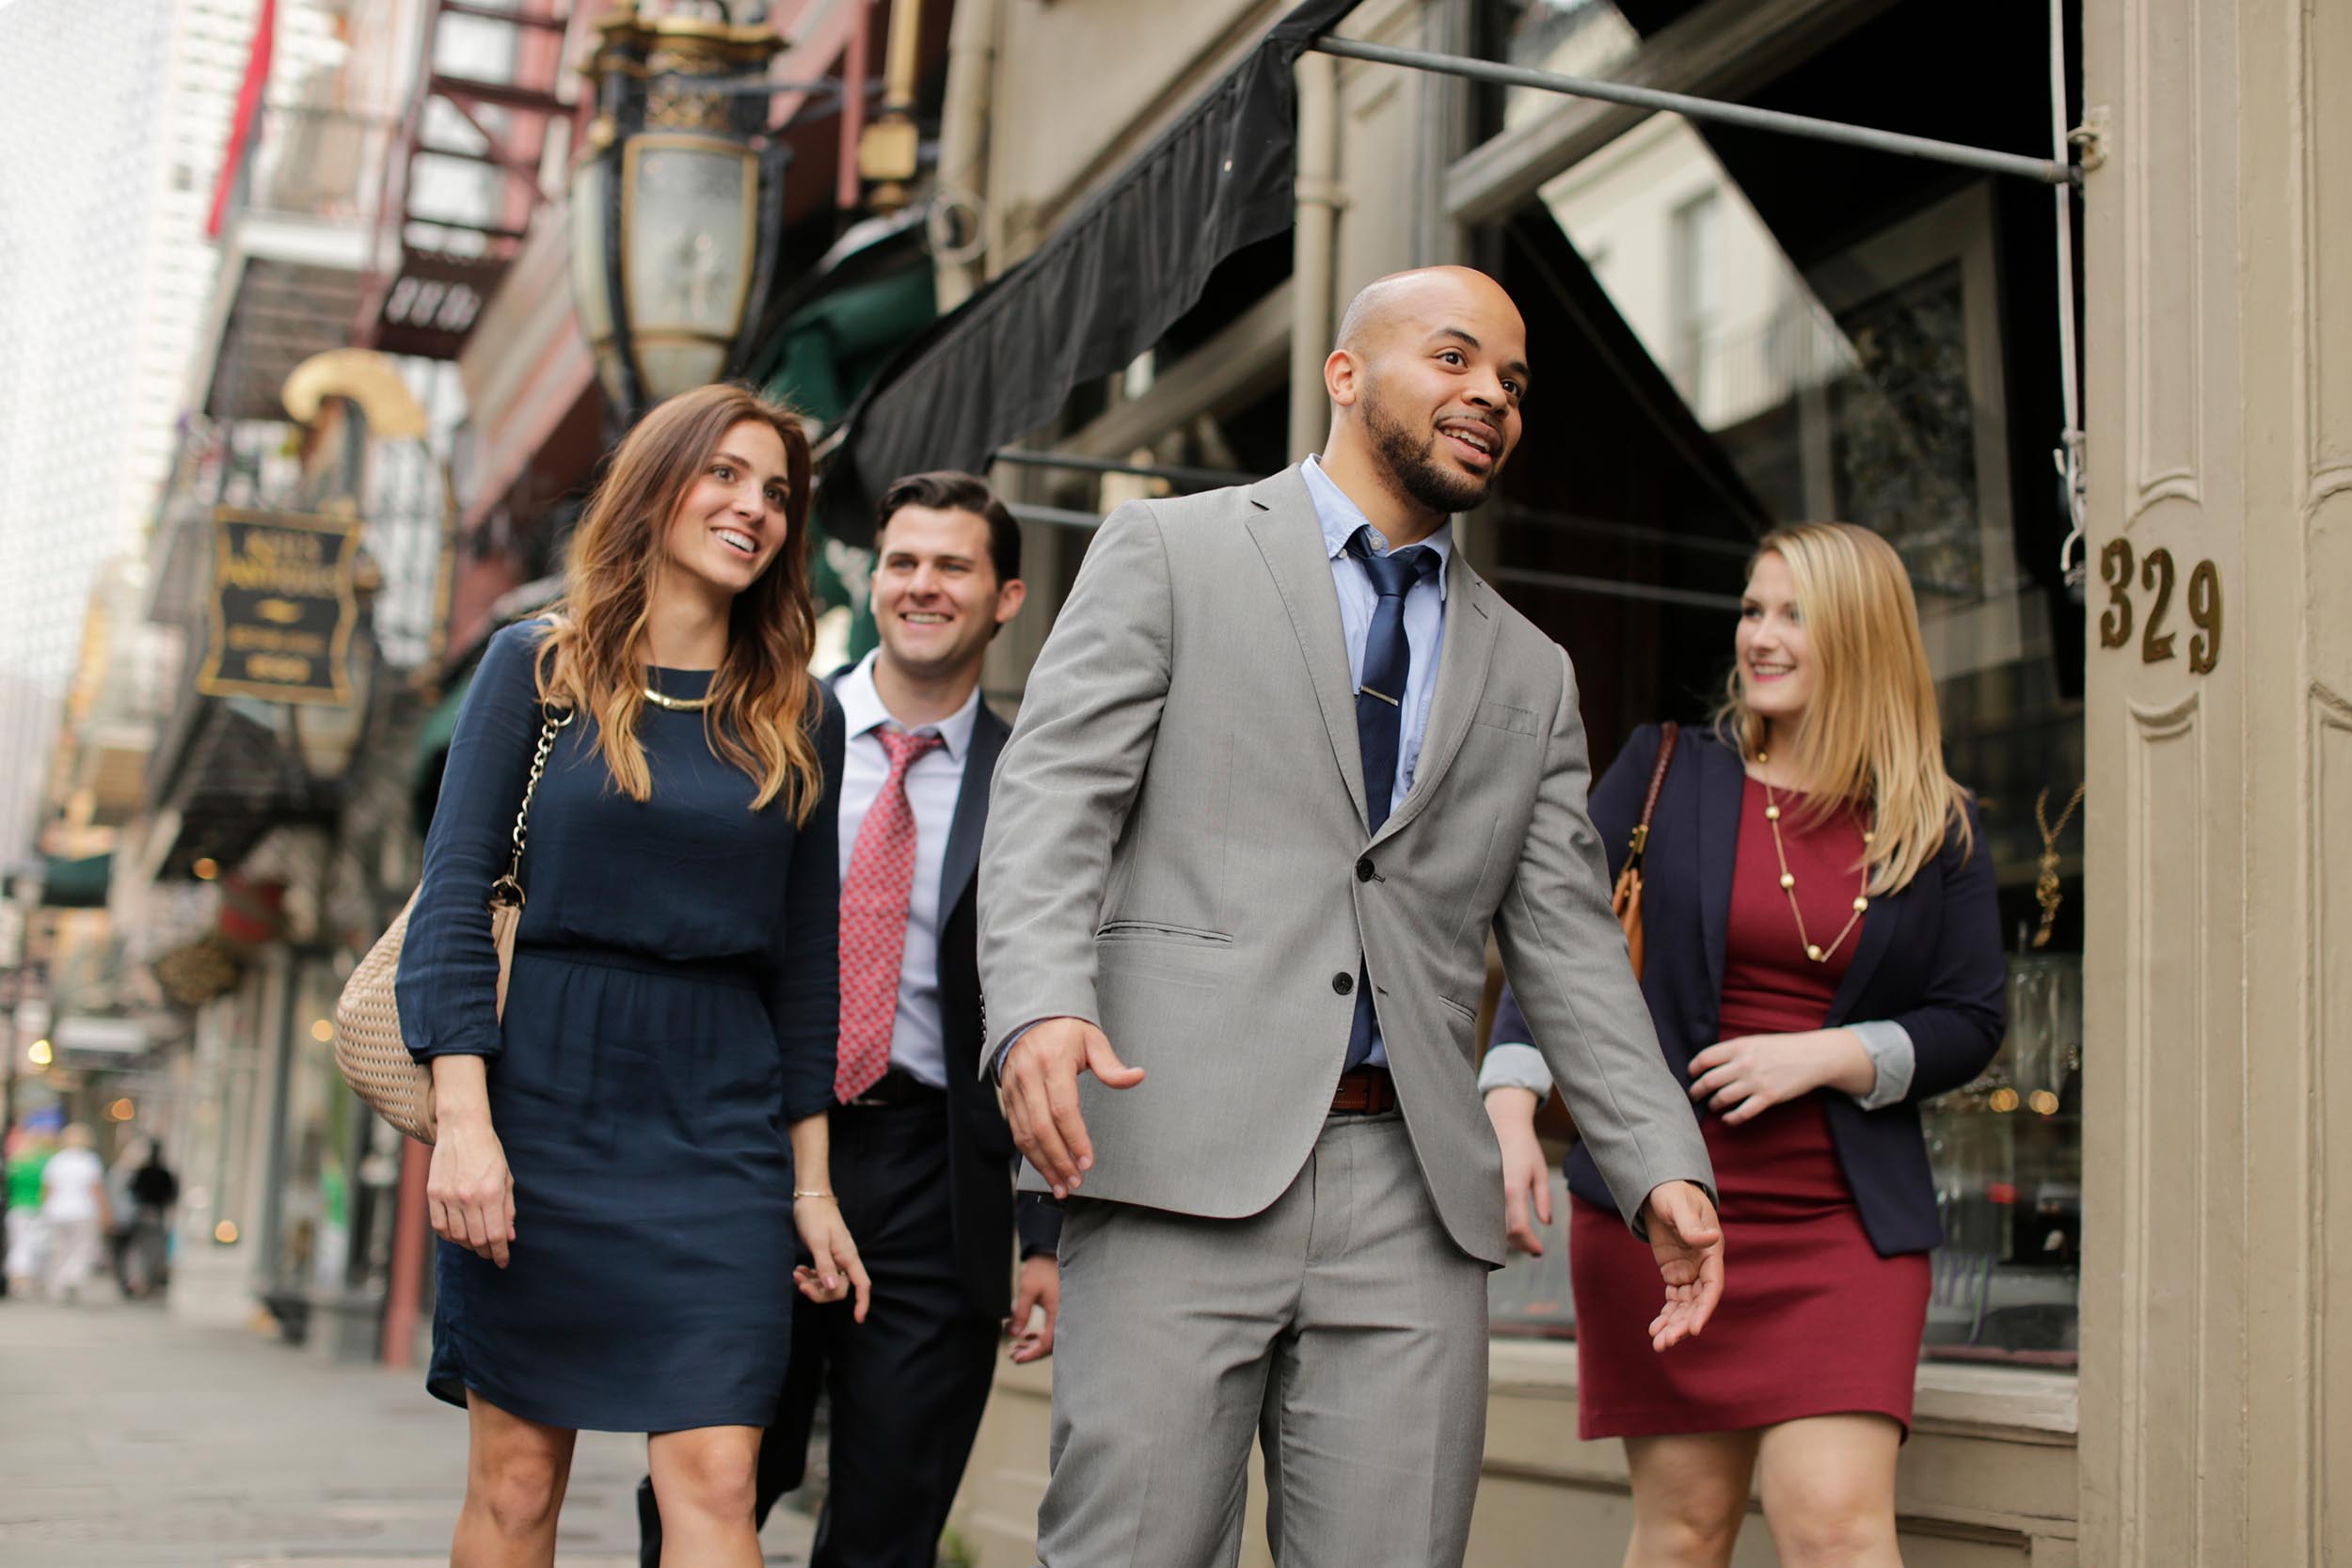 A group of business people walk downtown